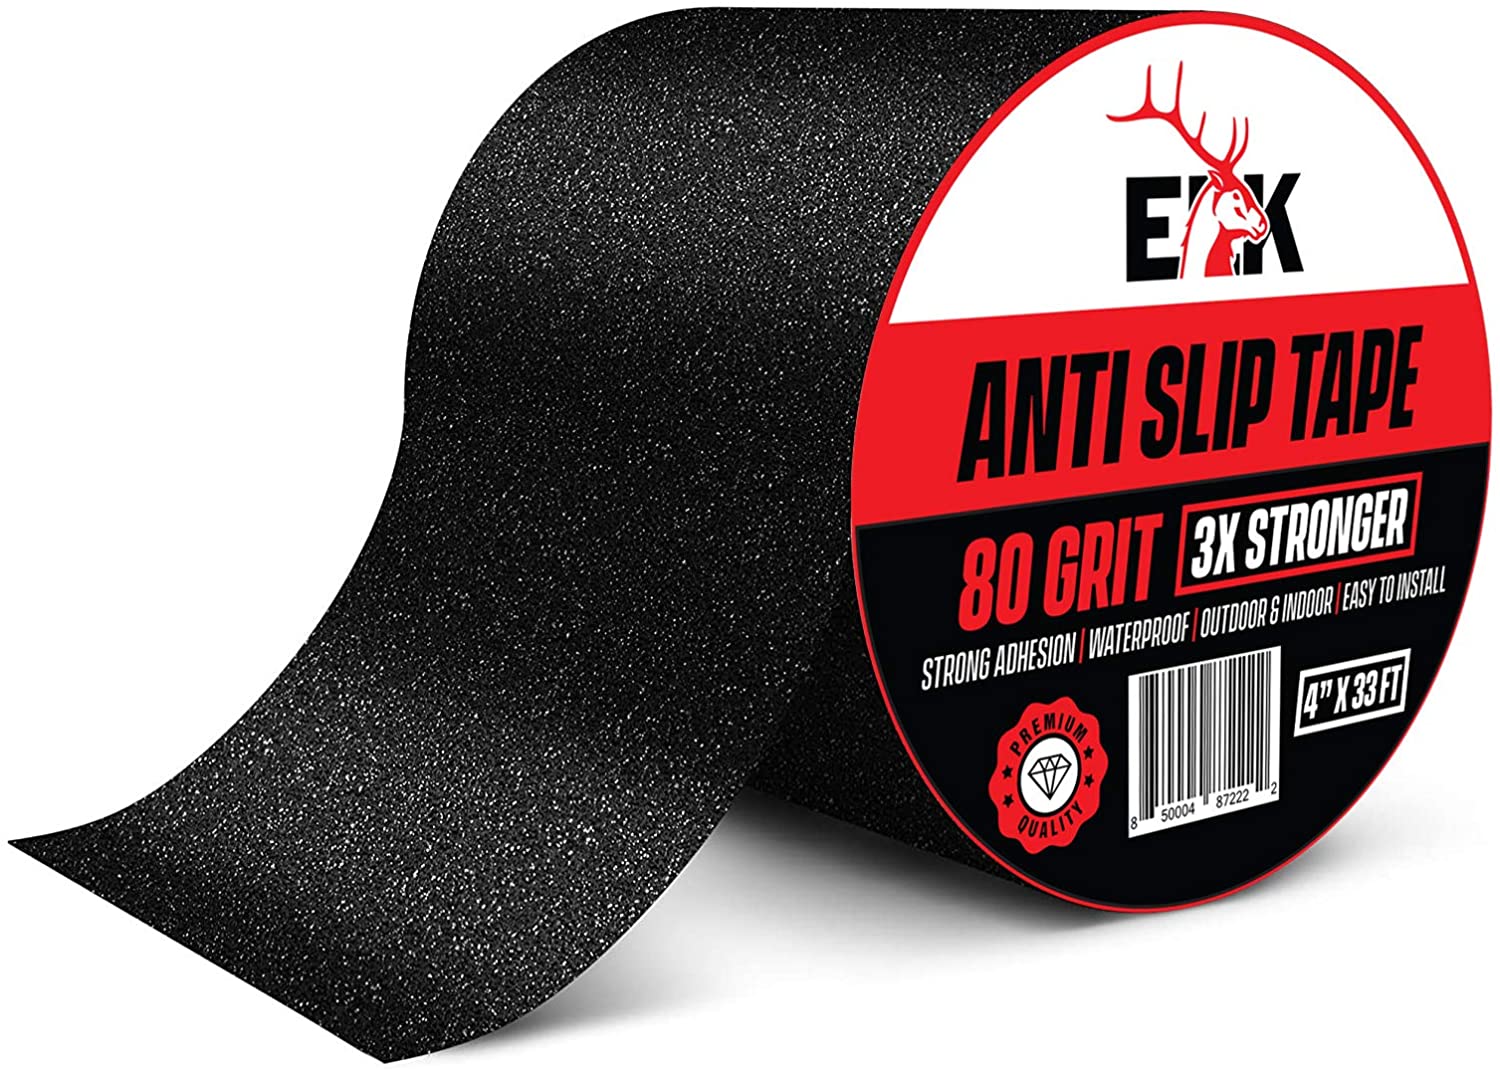 4 X 33 Roll Rubberized Anti Slip Safety Tape 80 Grit Non Skid Grip Water Proof 